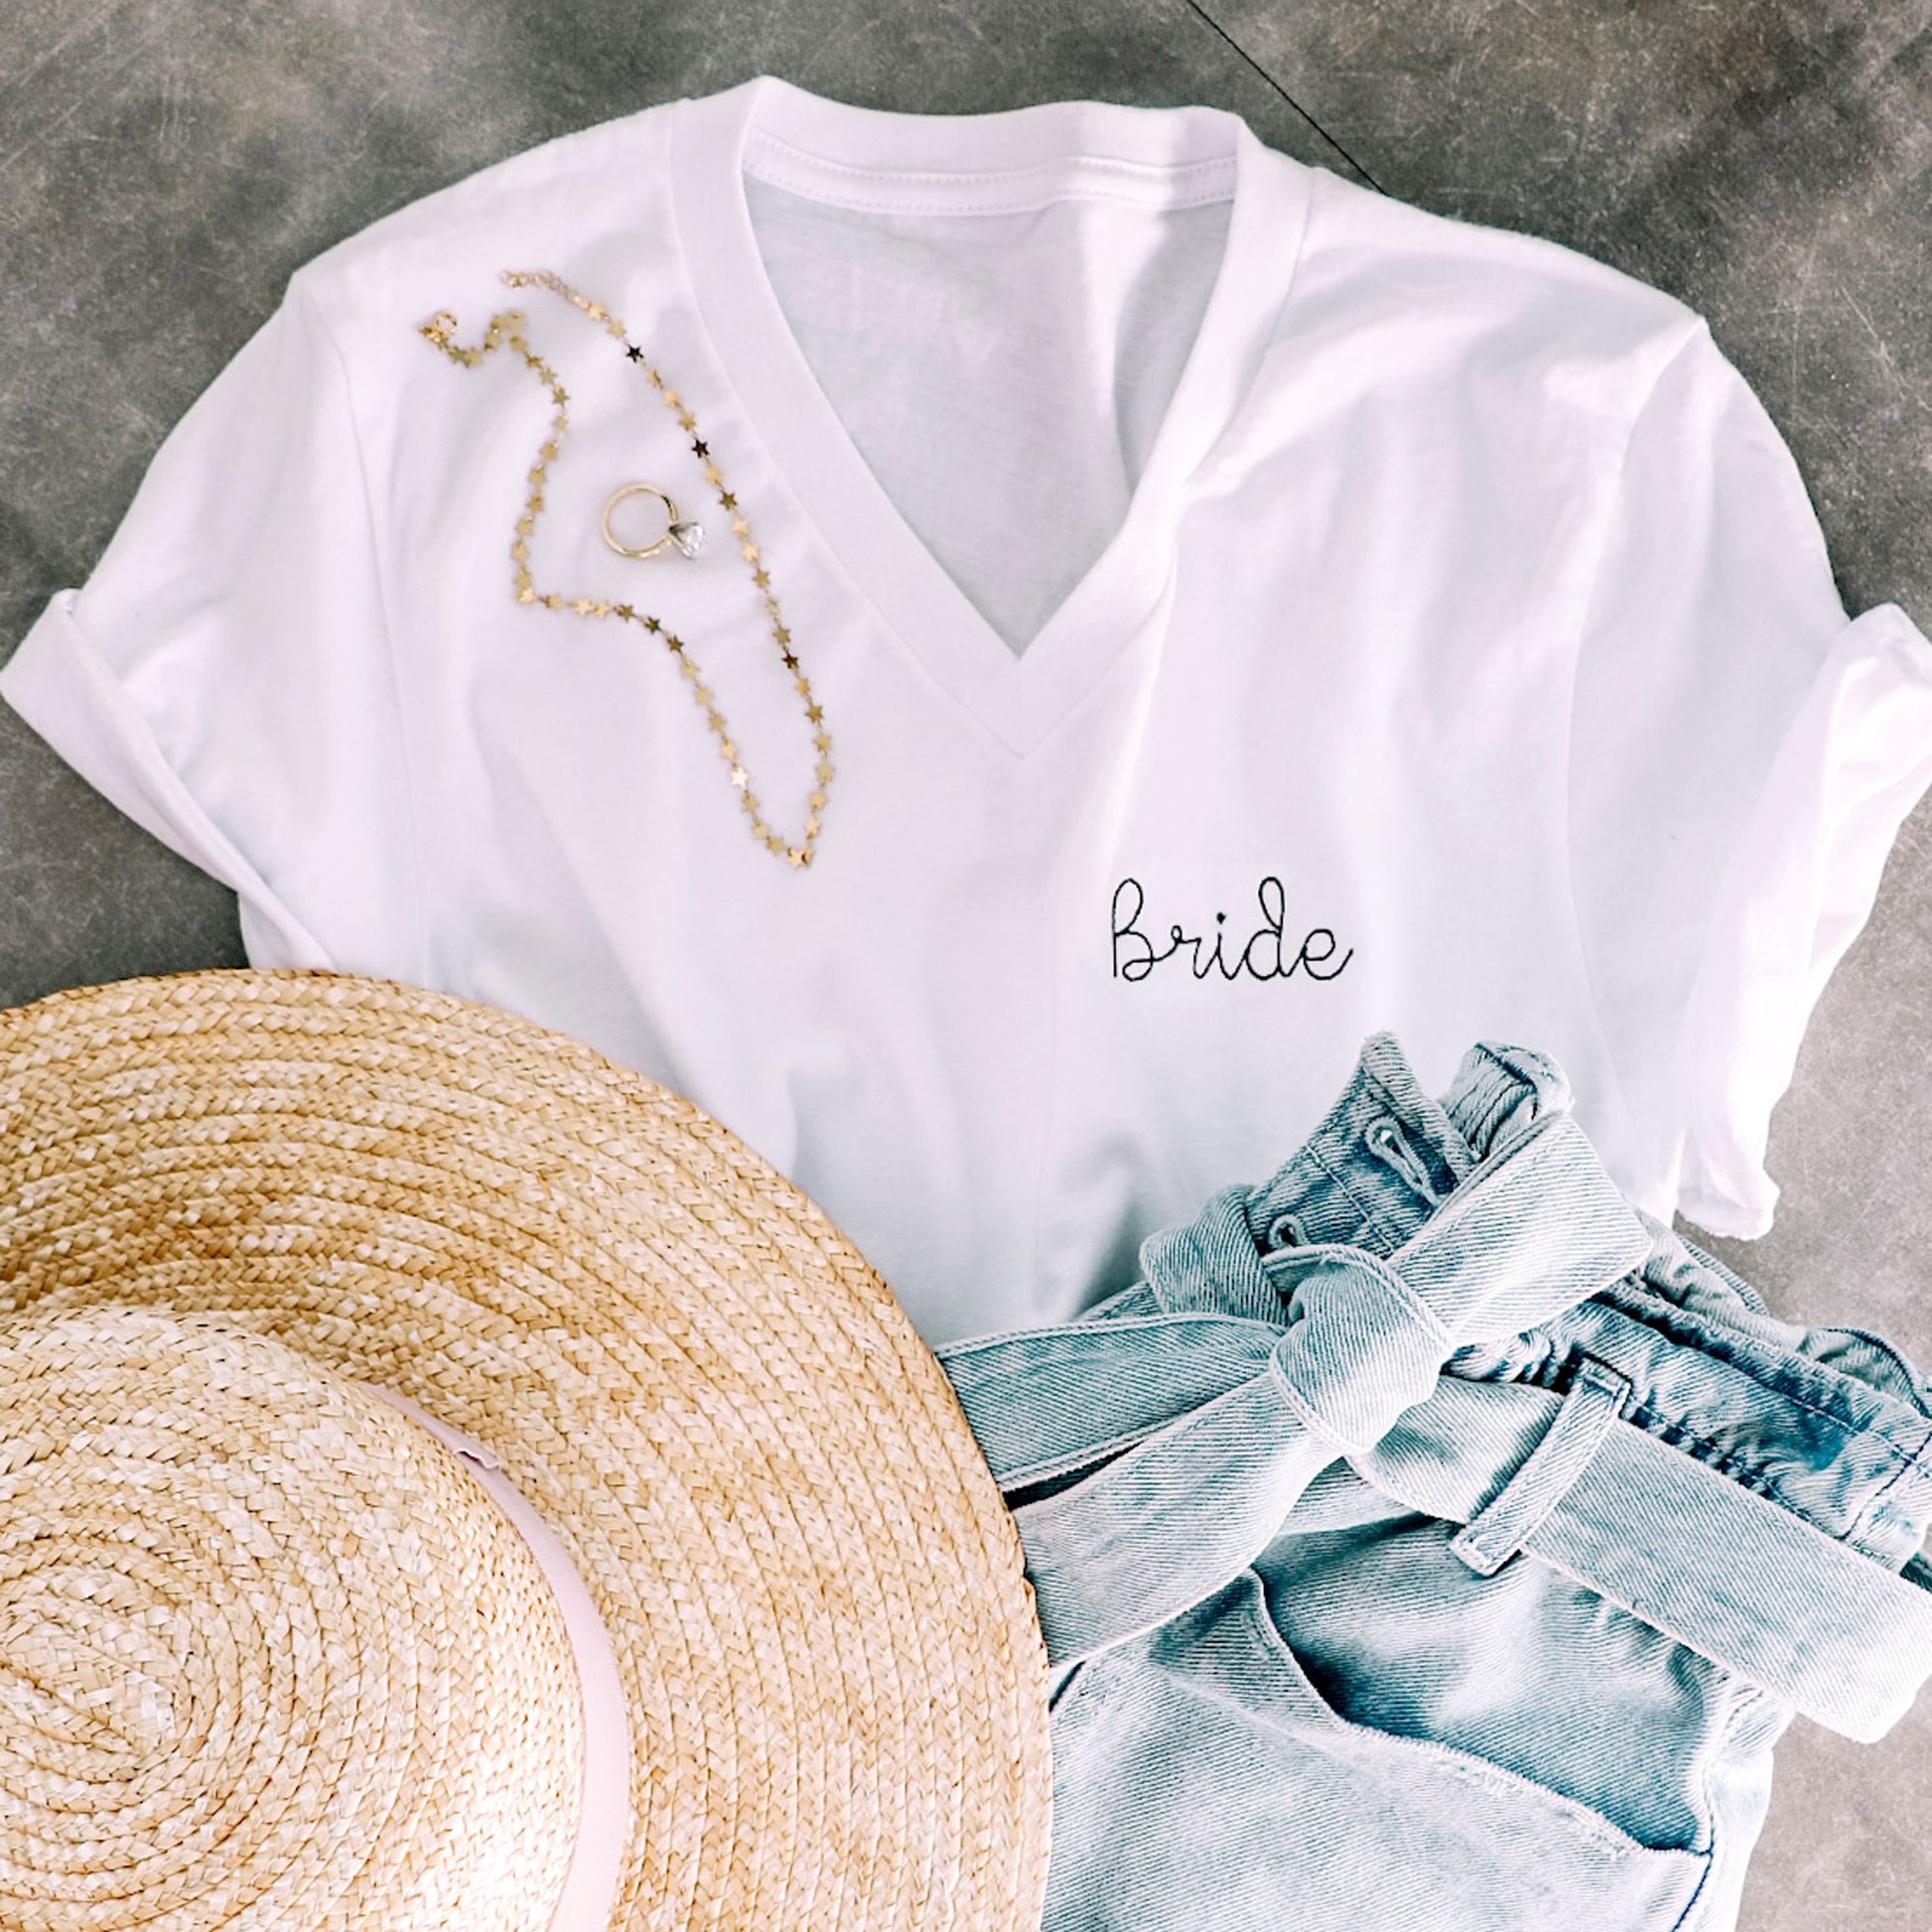 flat lay of v neck t-shirt with bride embroidered in black thread in a stitch font on the left chest paired with a hat, jewelry, and denim shorts